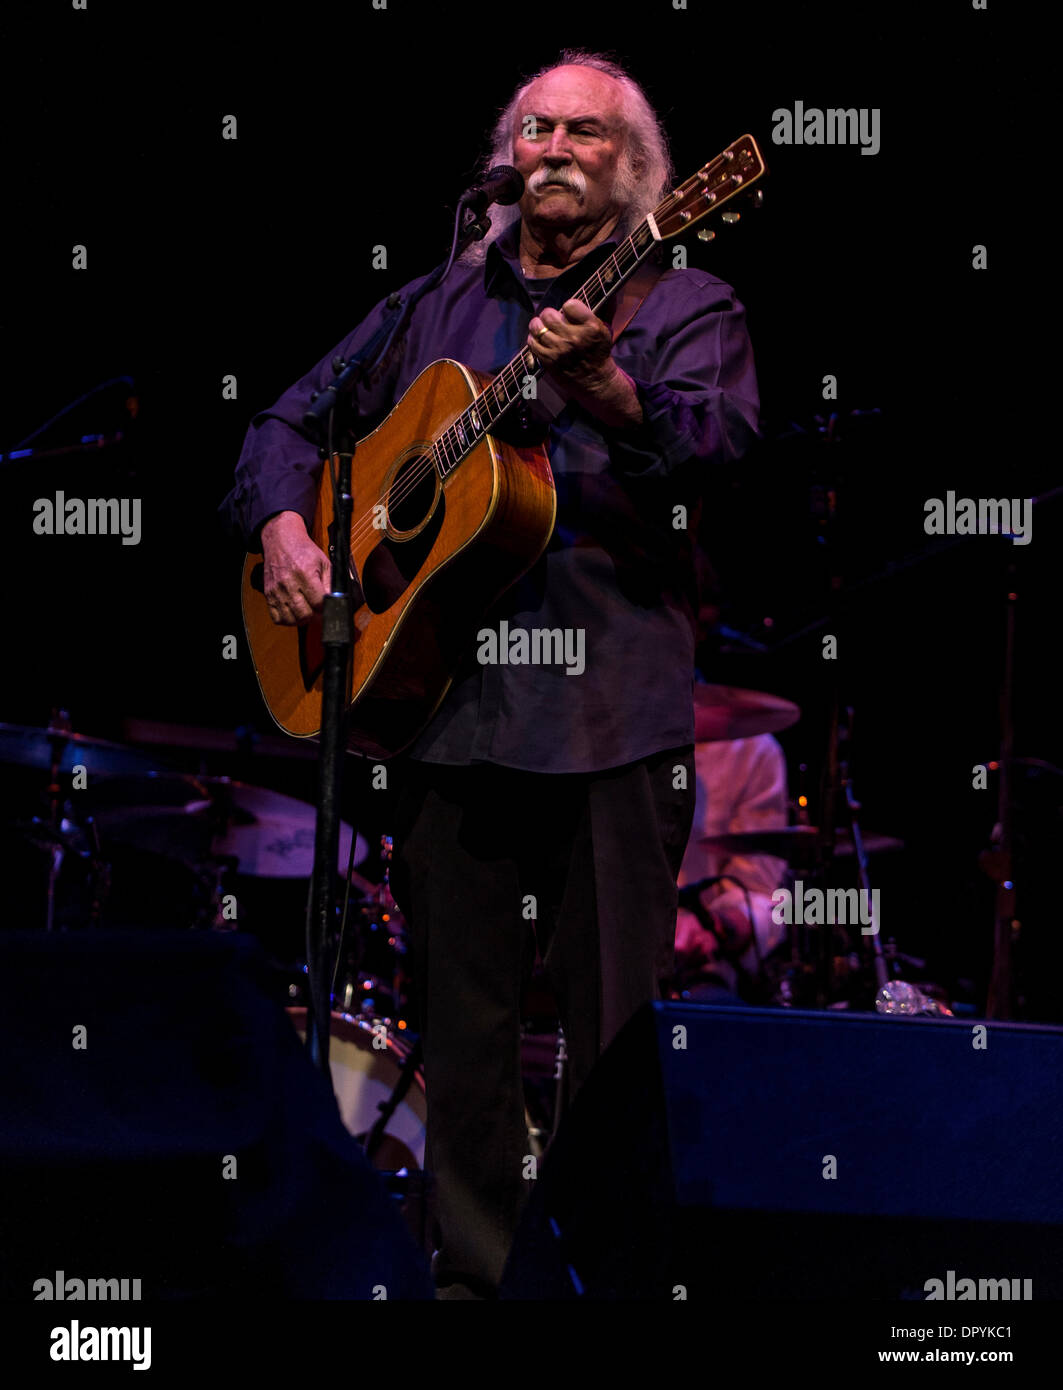 Santa Barbara, California, USA. 16th Jan, 2014. DAVID CROSBY performs at the Lobero Theatre in a warm-up show prior to the start of a tour supporting his new solo album, Croz, on Blue Castle Records. Croz, to be released on January 28 in the U.S., is Crosby's first solo album of studio material in 20 years. Credit:  Brian Cahn/ZUMAPRESS.com/Alamy Live News Stock Photo